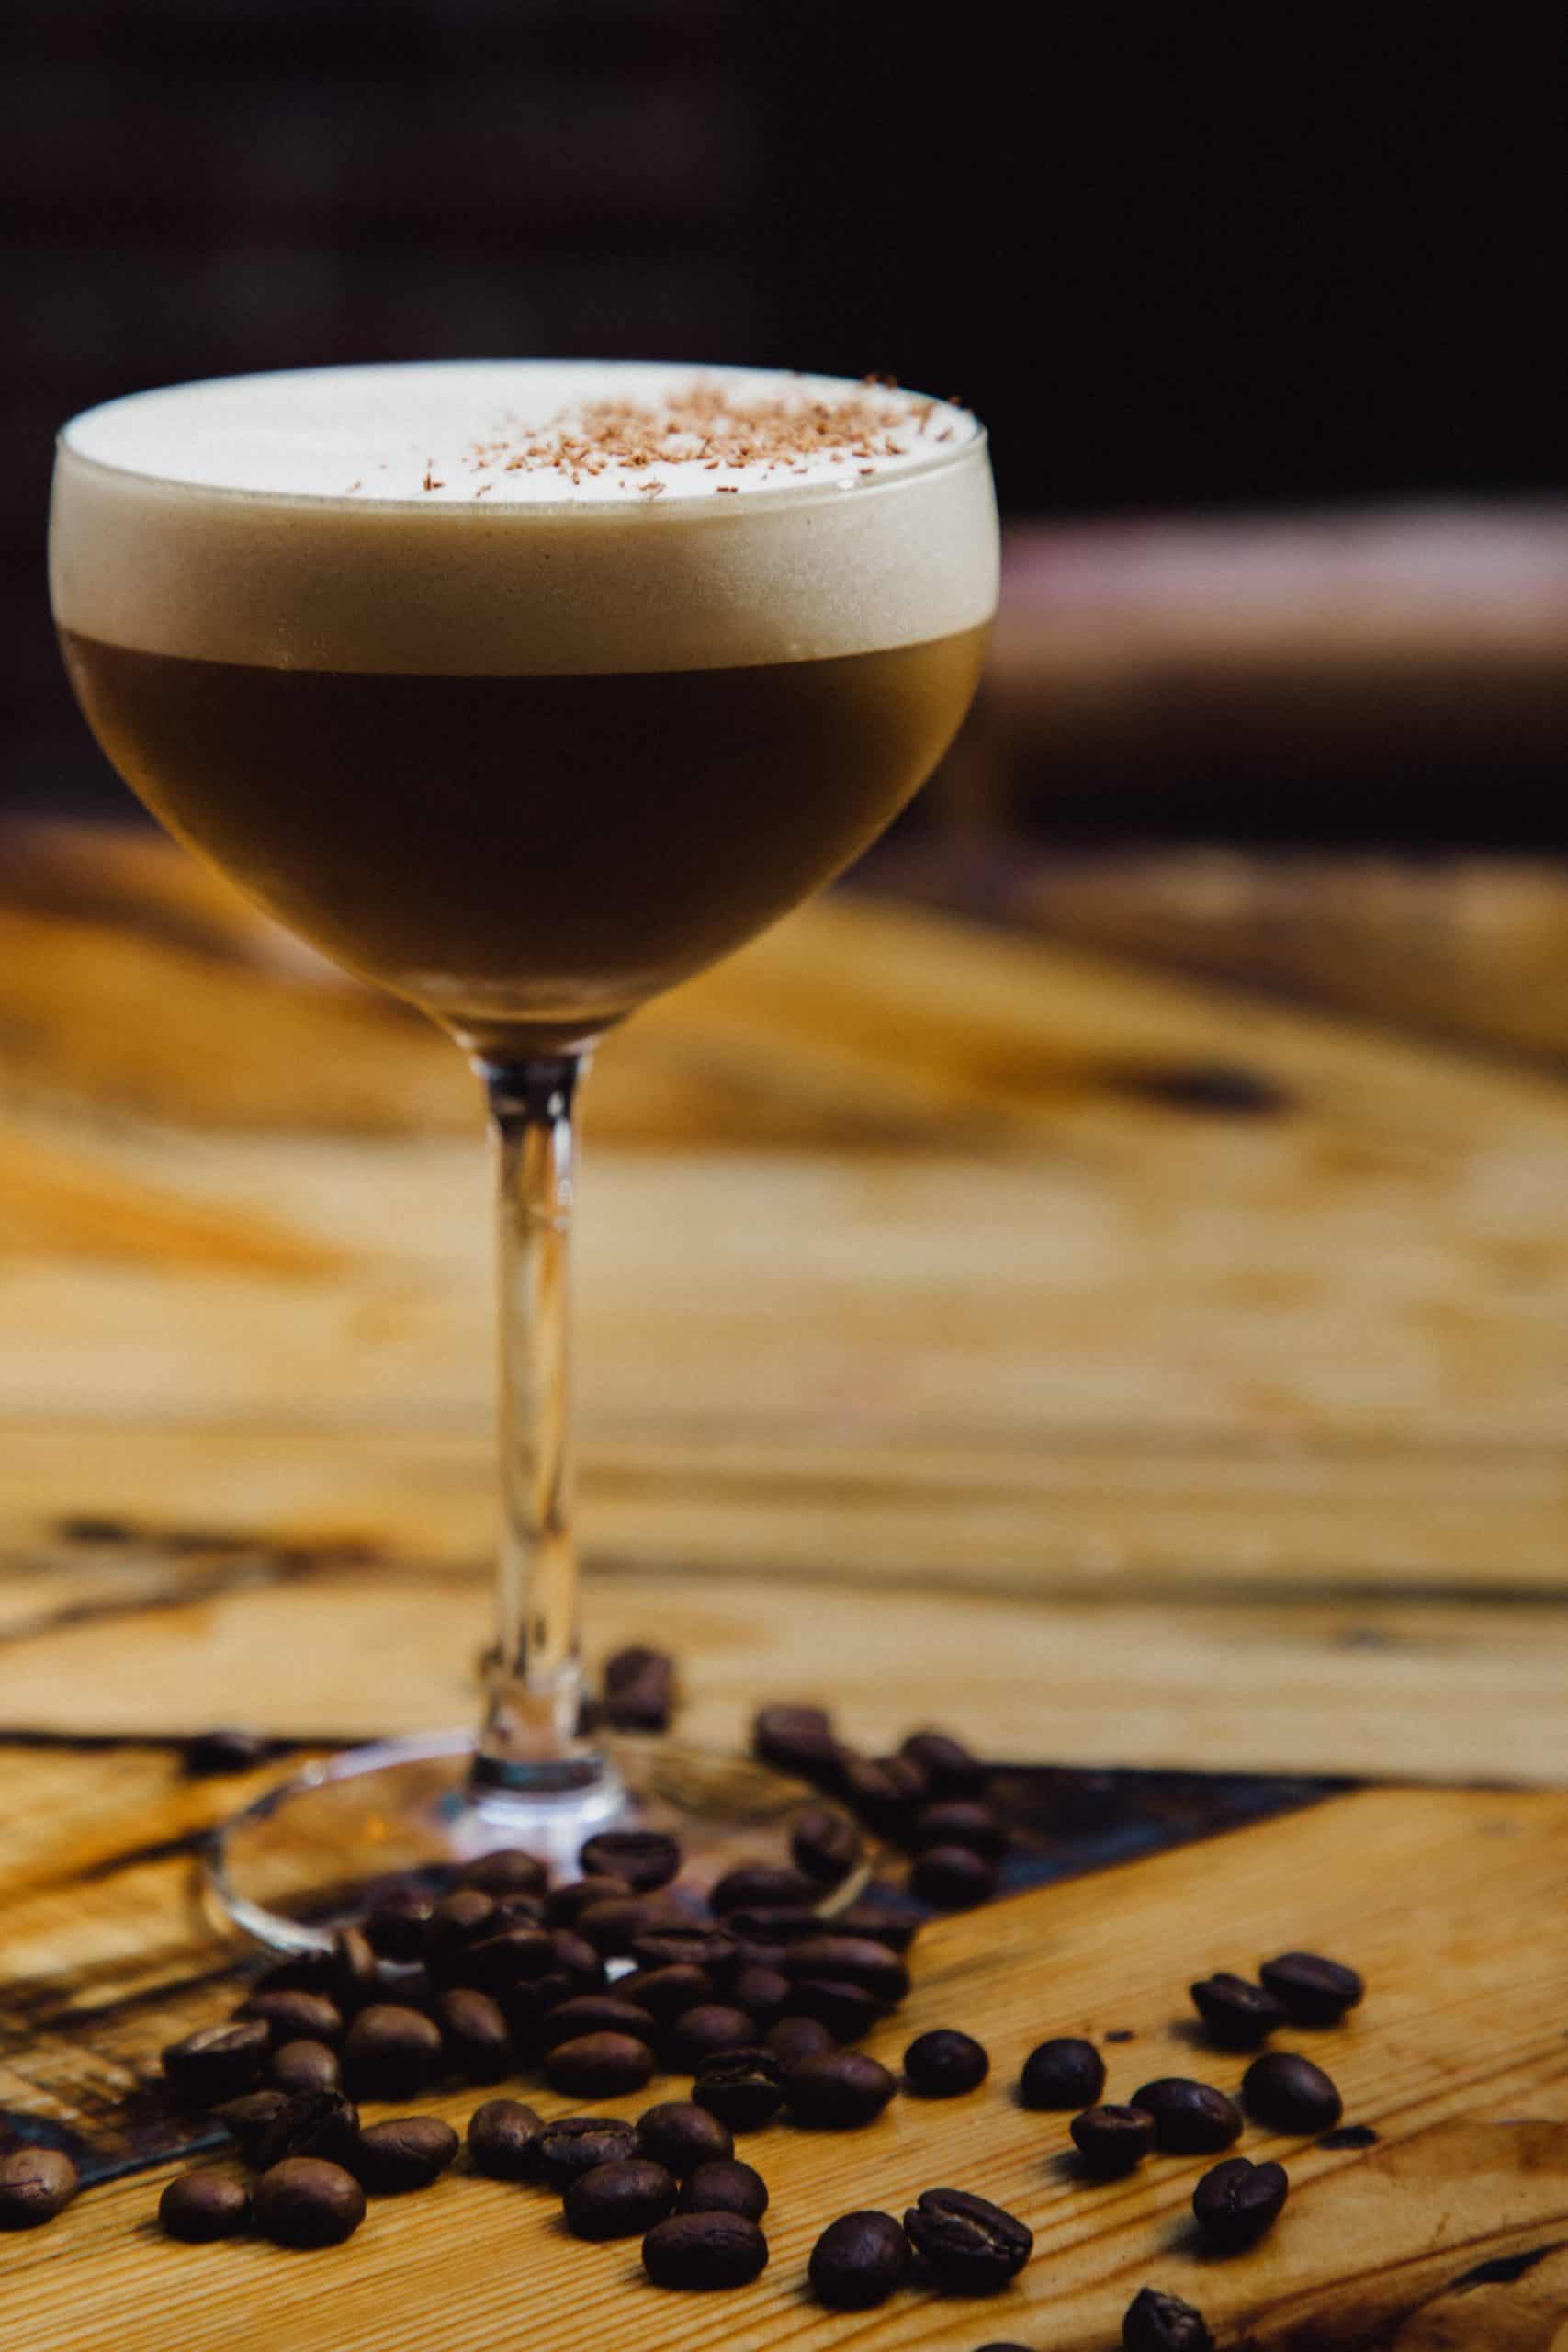 Coffee cocktail with Kahlua.